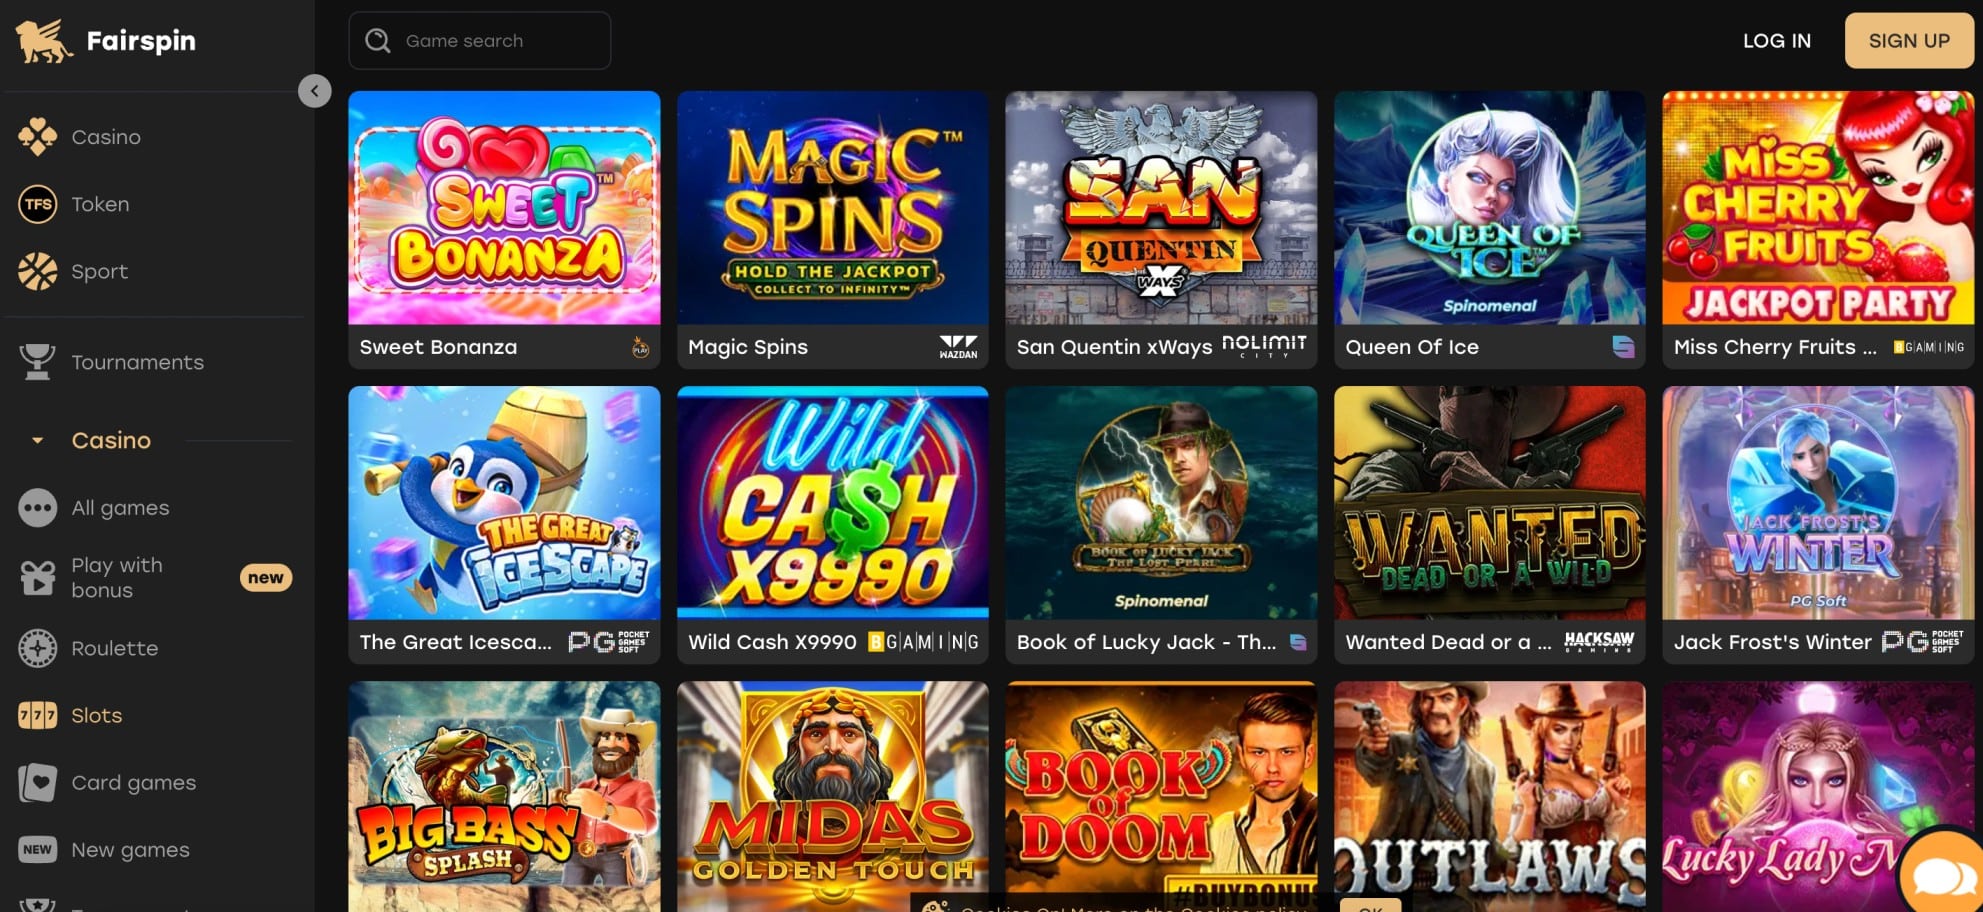 10 Small Changes That Will Have A Huge Impact On Your online casino